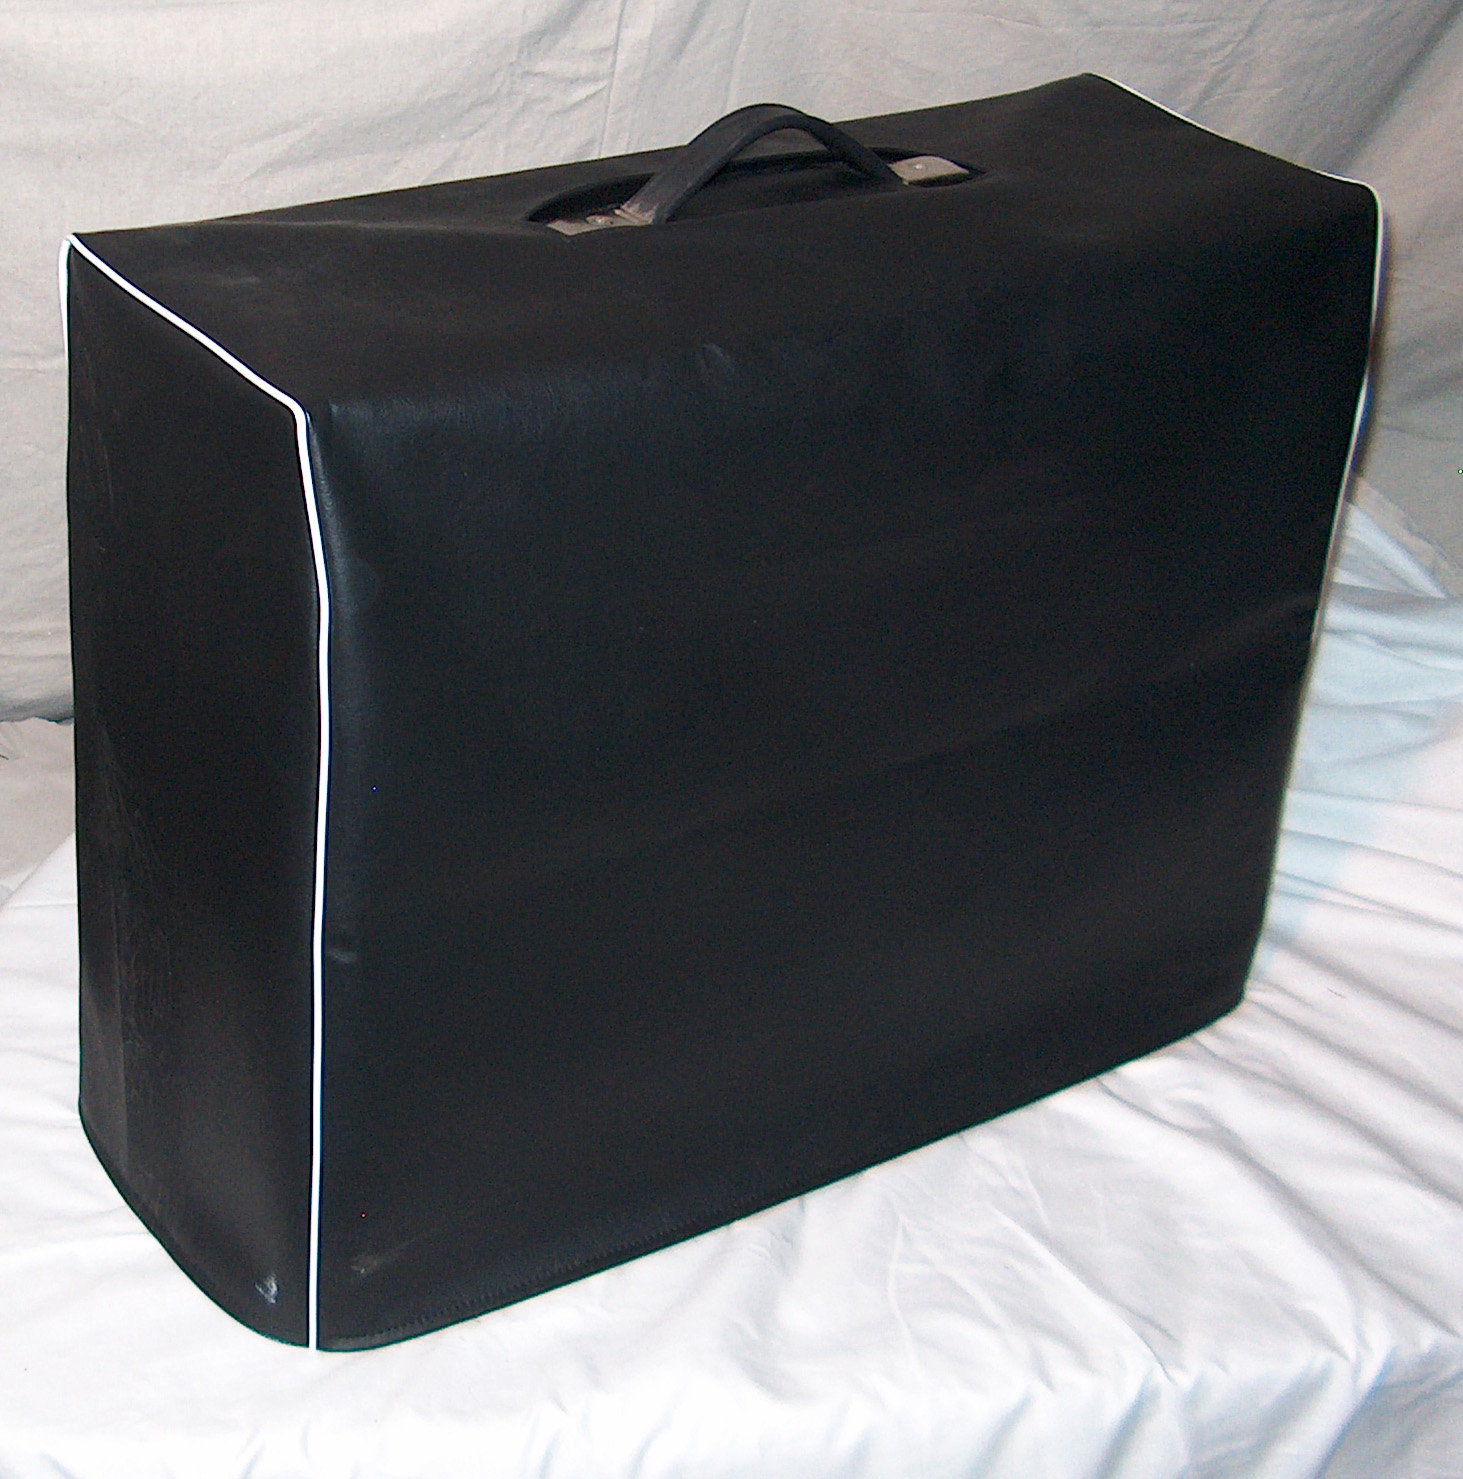 Example of black vinyl cover with white piping.